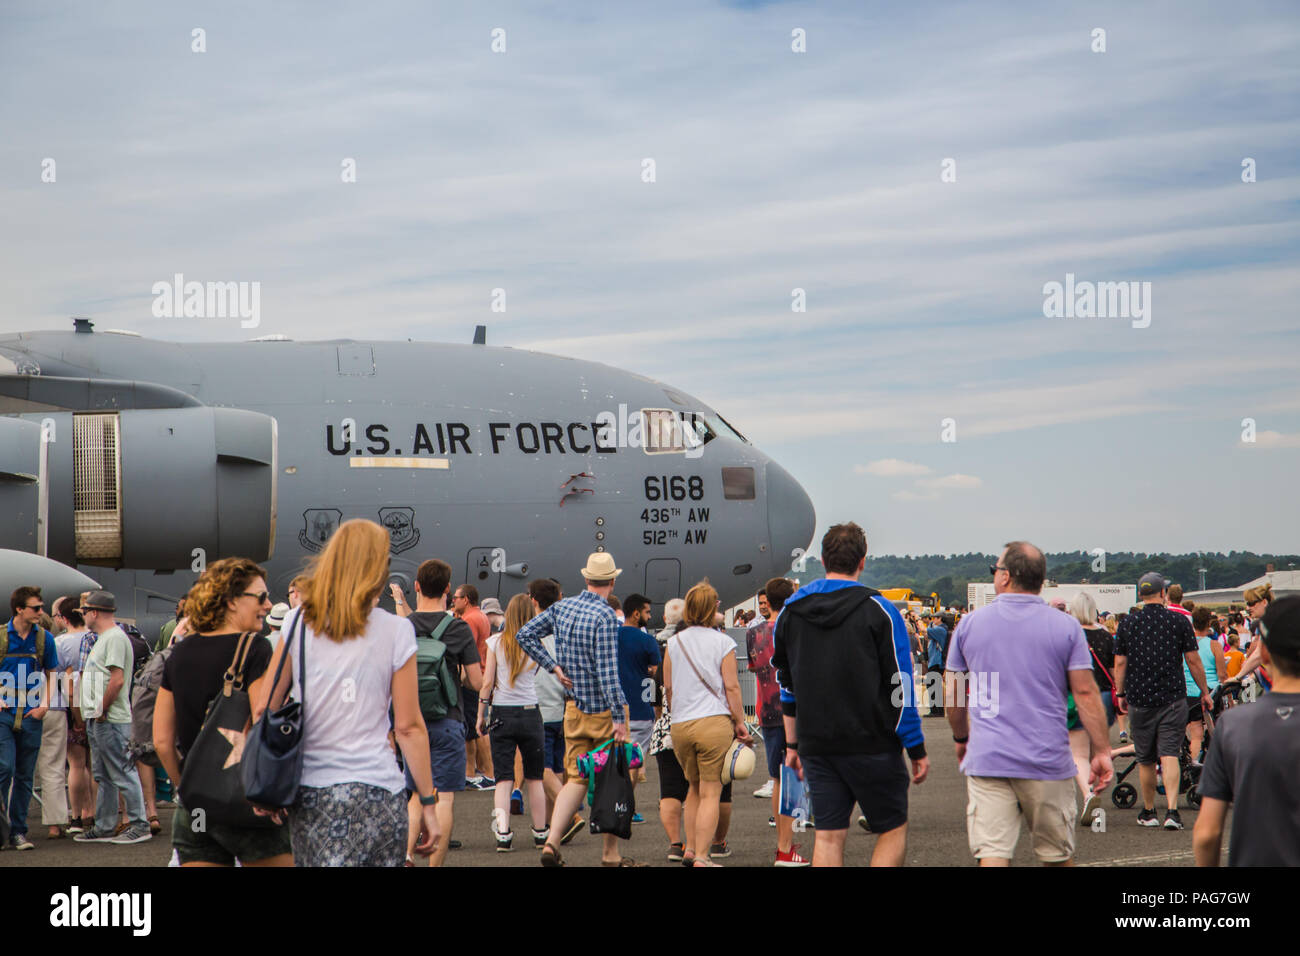 The Boeing C-17 Globemaster III large military transport aircraft display in the Farnborough Airshow 2018. Stock Photo